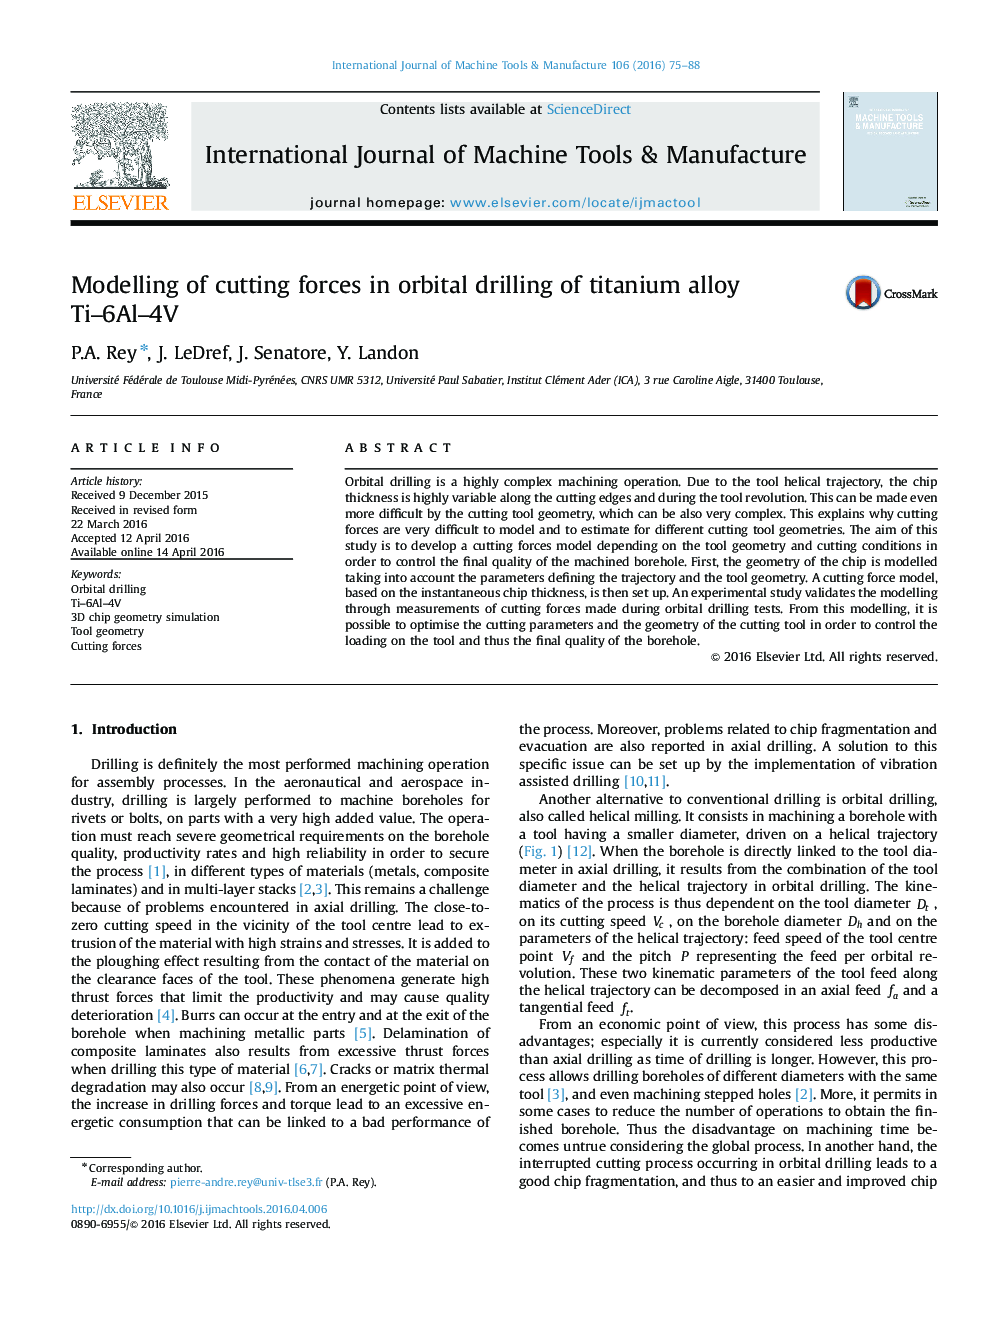 Modelling of cutting forces in orbital drilling of titanium alloy Ti–6Al–4V